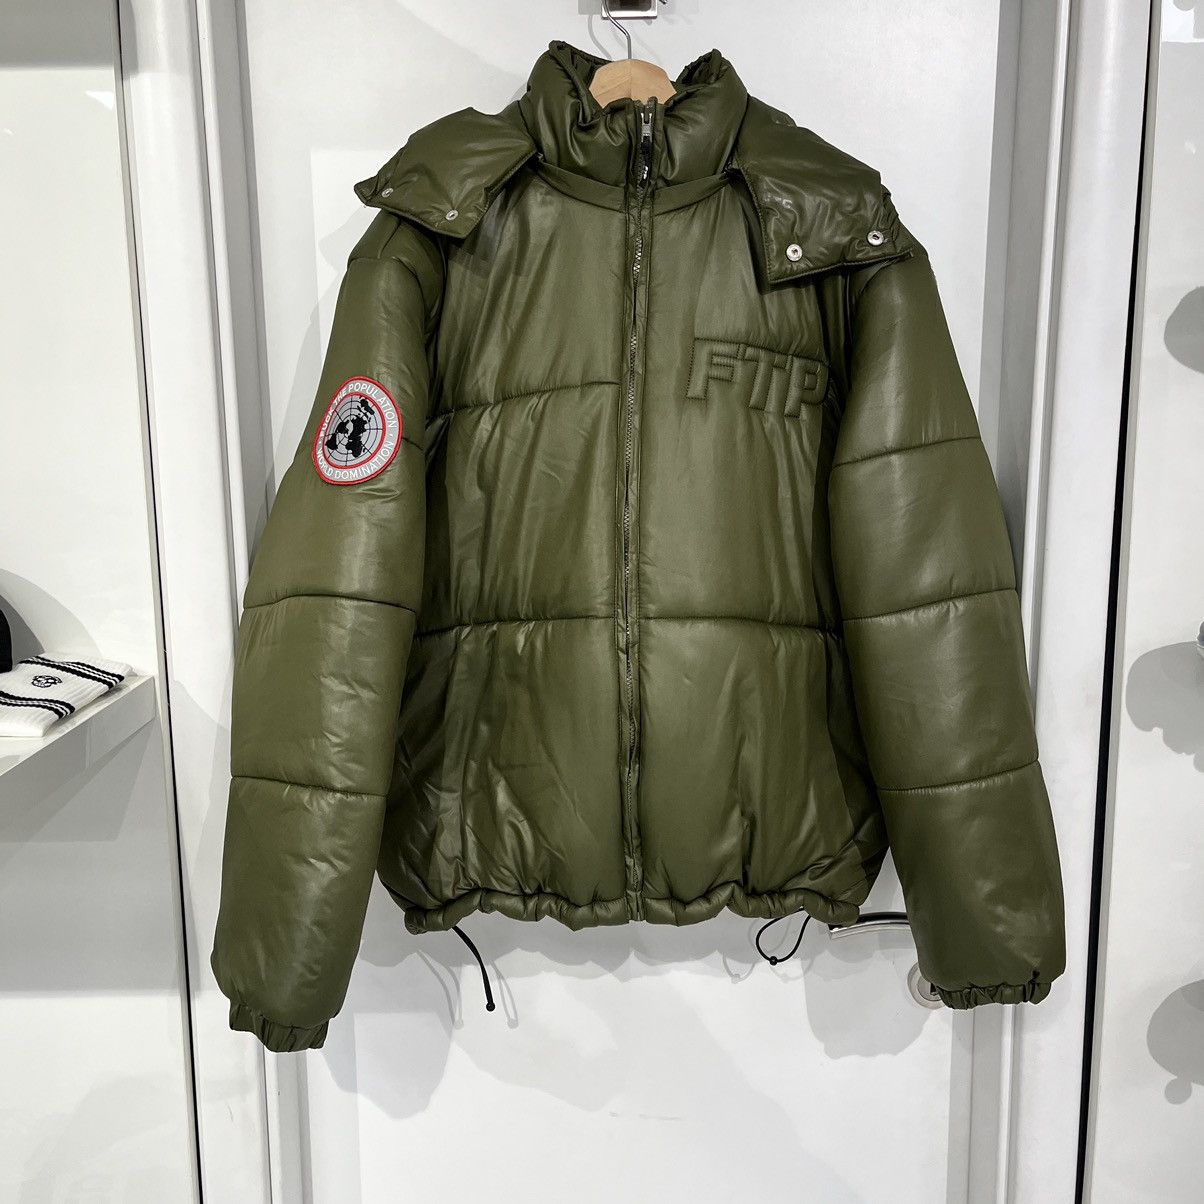 Fuck The Population FTP World Domination Puffer Jacket Olive | Grailed